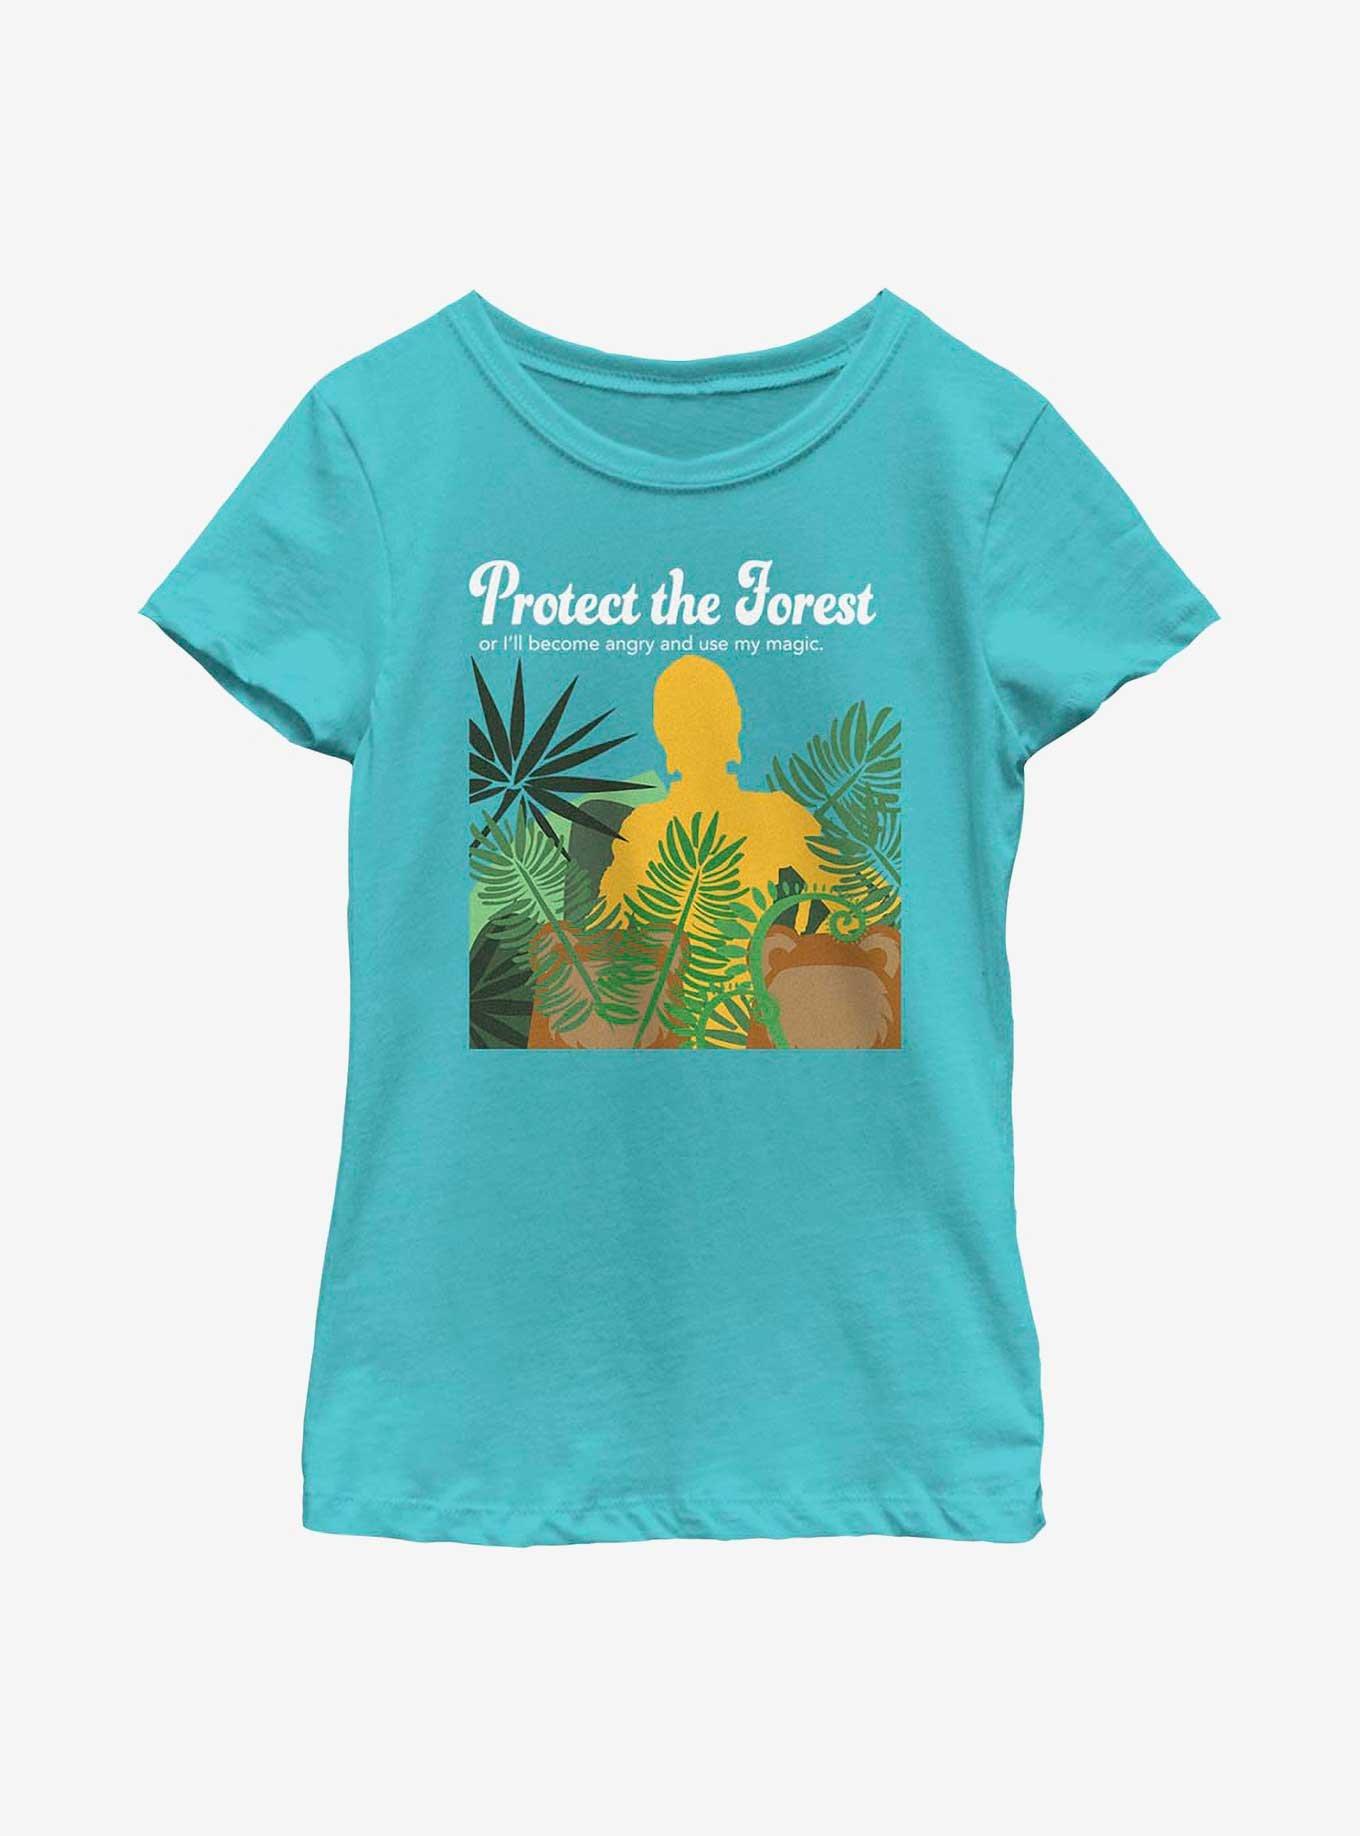 Star Wars Protect The Forest C-3PO Youth Girls T-Shirt, TAHI BLUE, hi-res